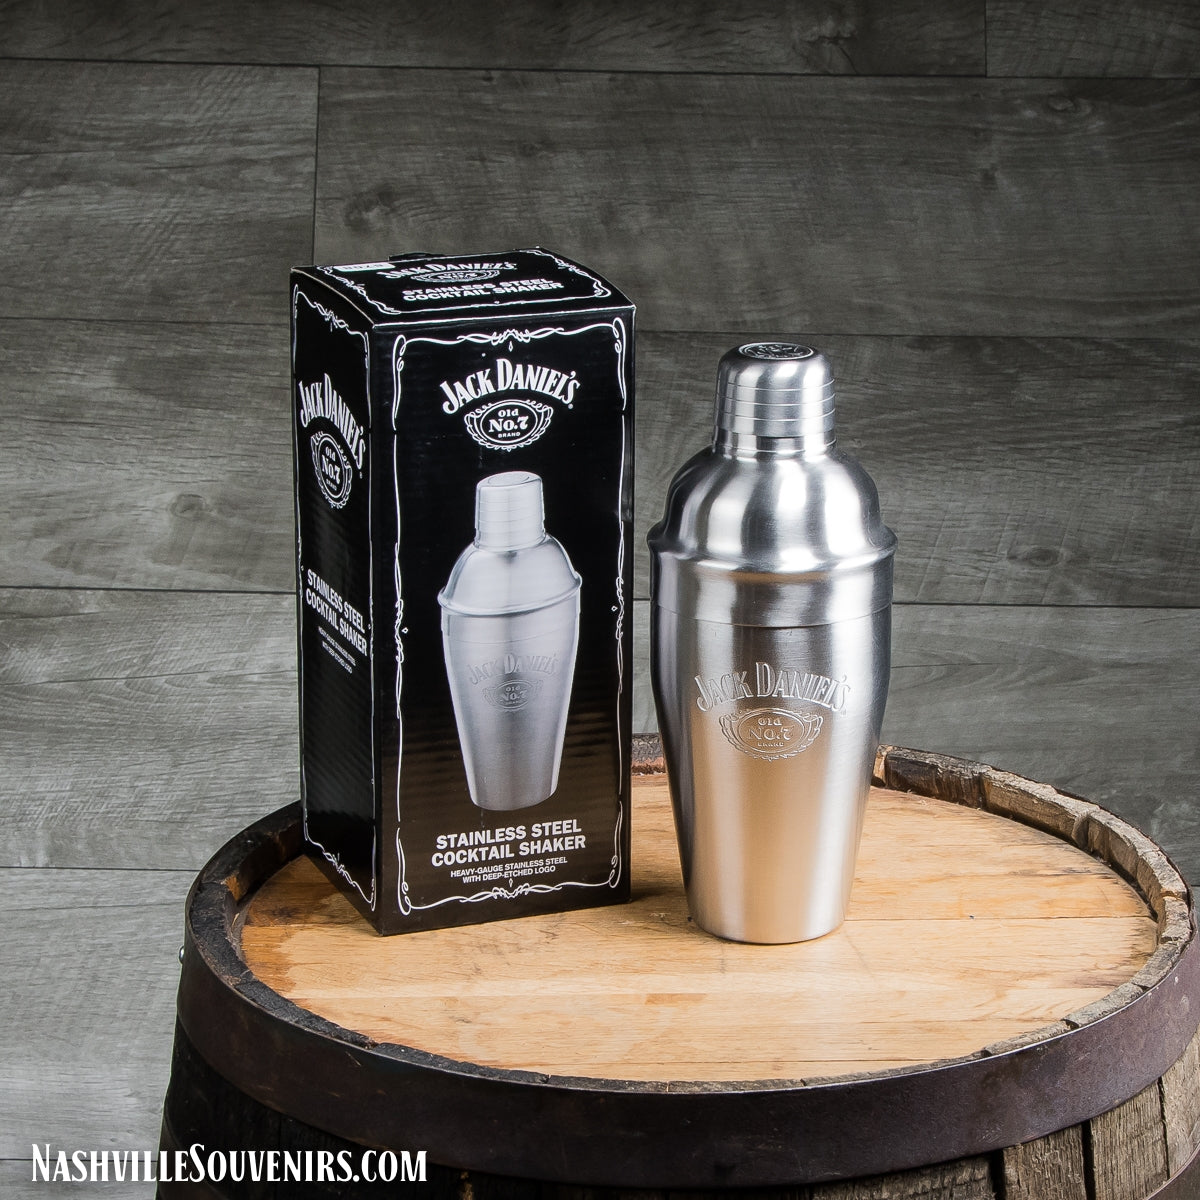 Officially licensed Jack Daniels Stainless Steel Cocktail Shaker. FREE SHIPPING on all US orders over $75!